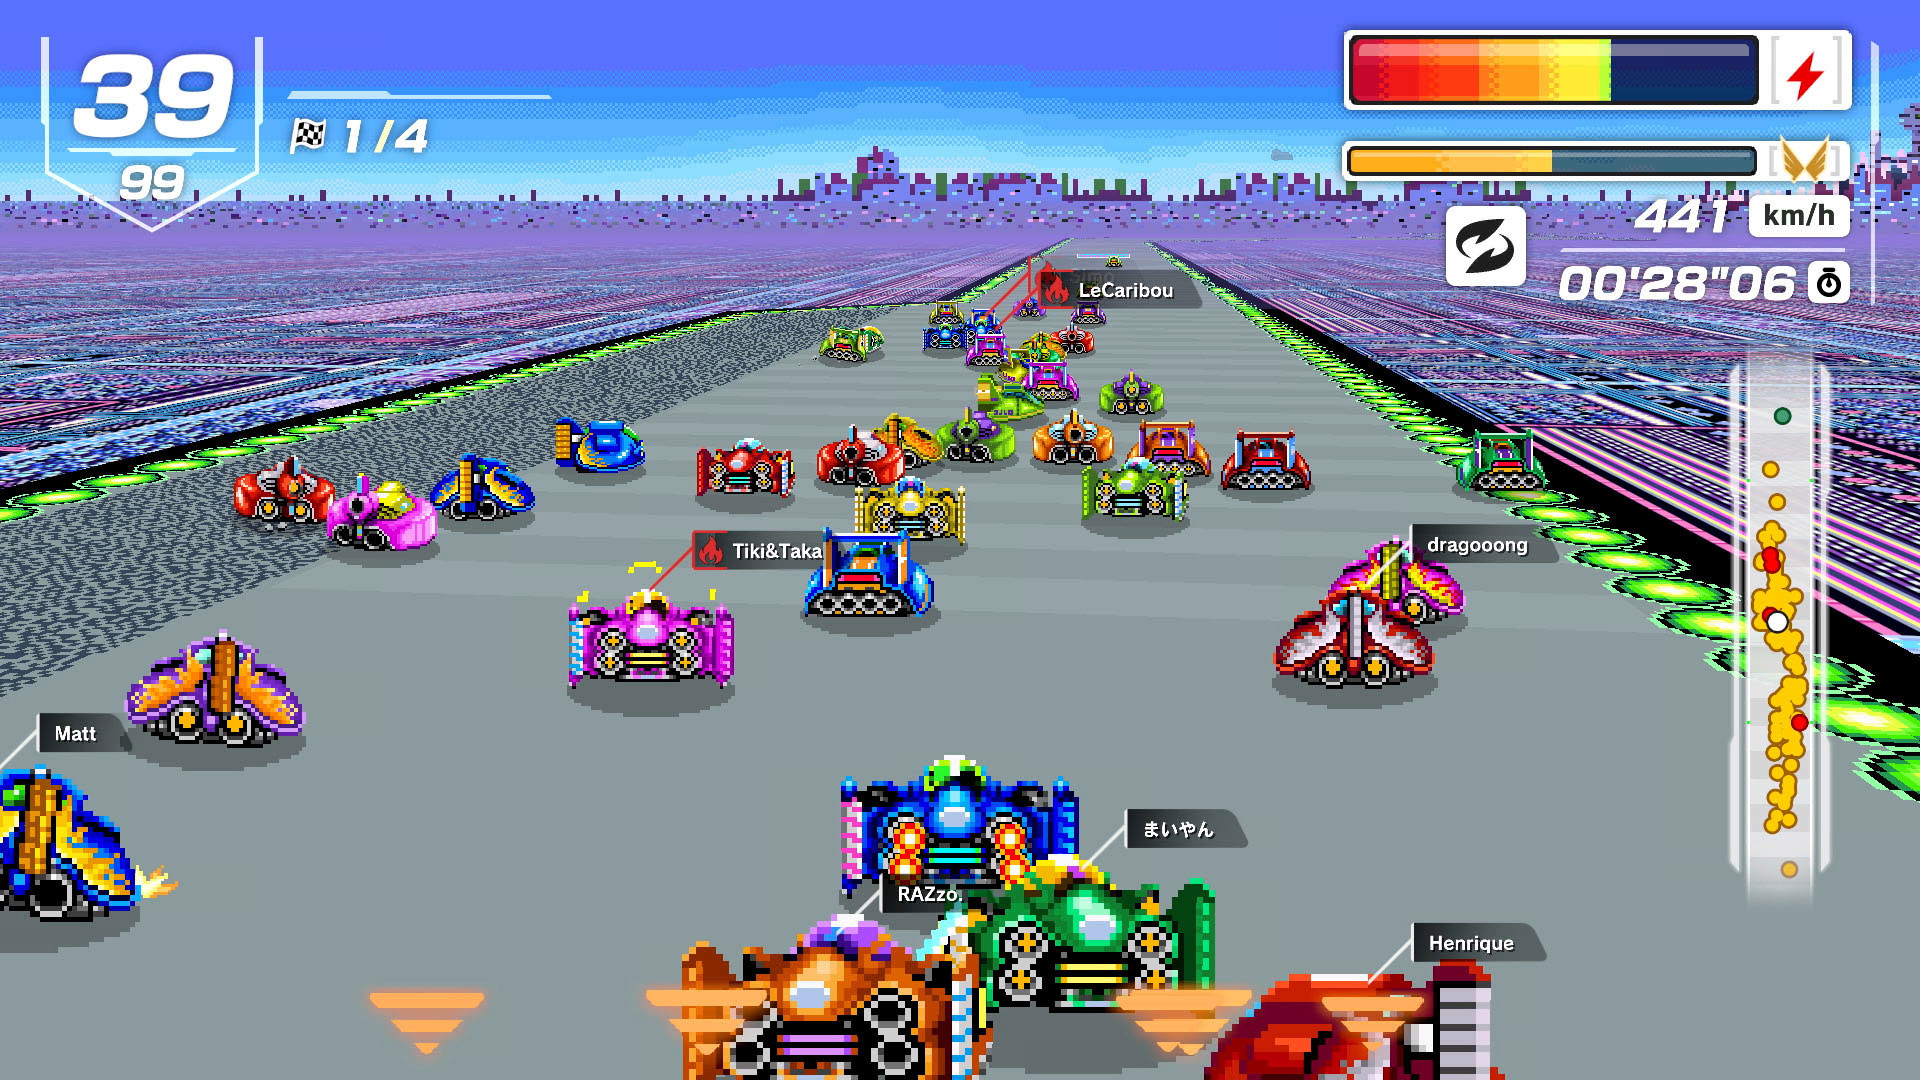 F-Zero 99 features courses and machines from the original Super NES game, but with 99 racers on the course